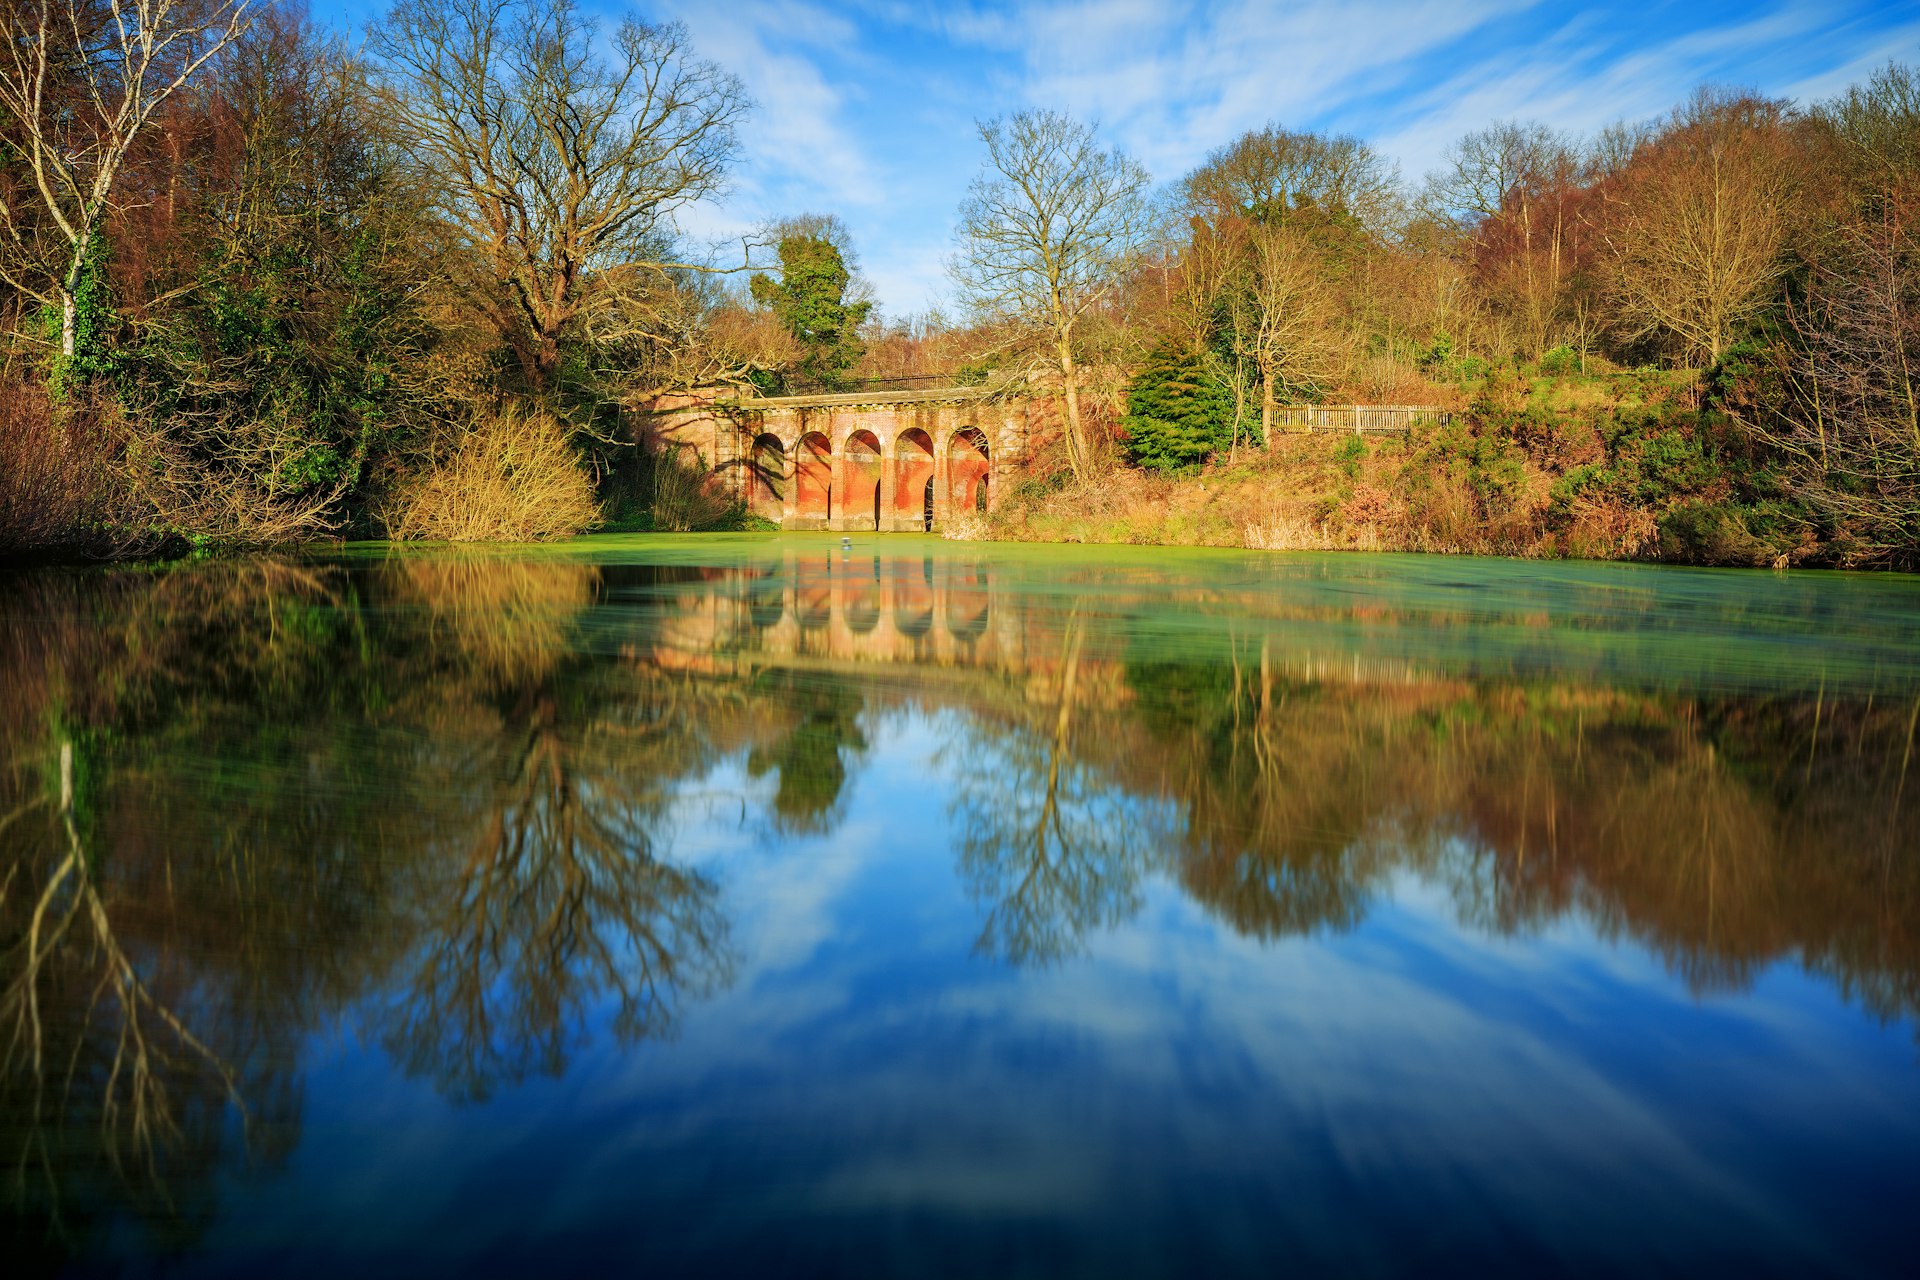 A calm pond surrounded by trees, with an arched bridge in the background